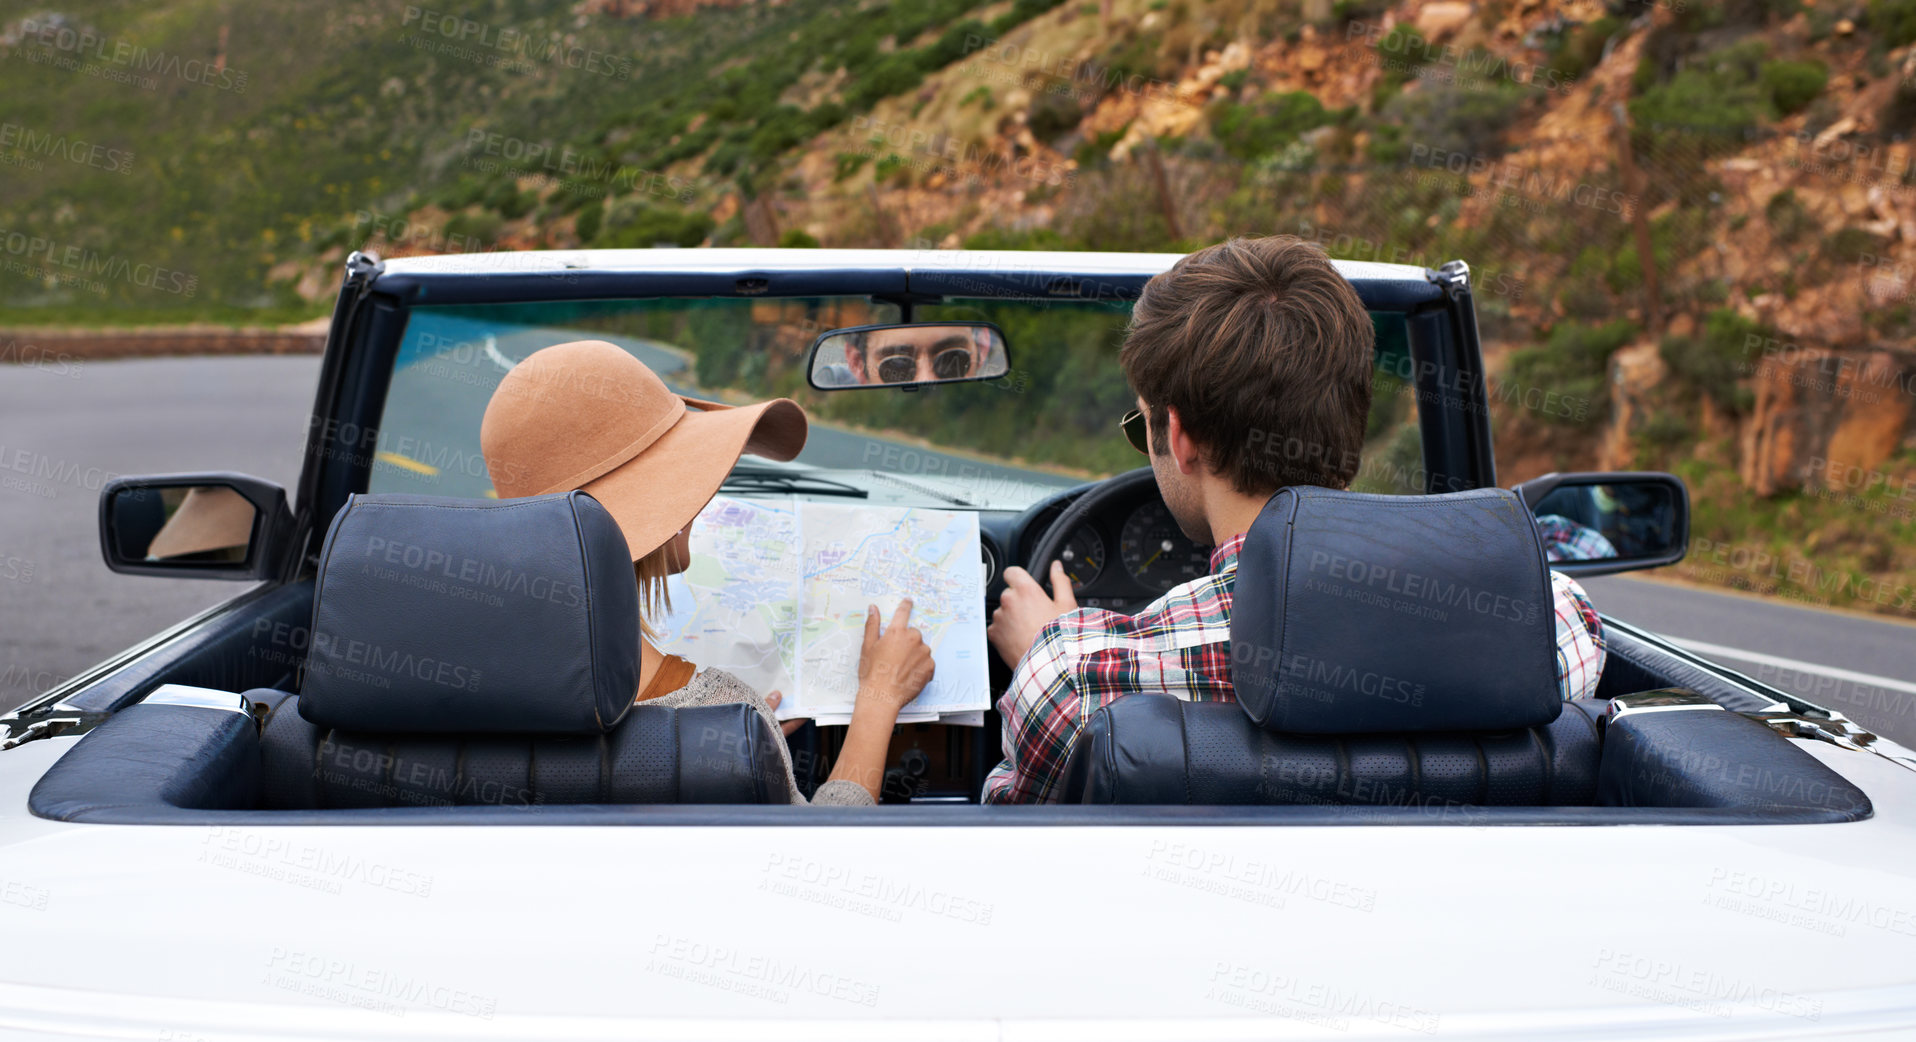 Buy stock photo Rearview shot of a young couple reading a map while sitting in a car